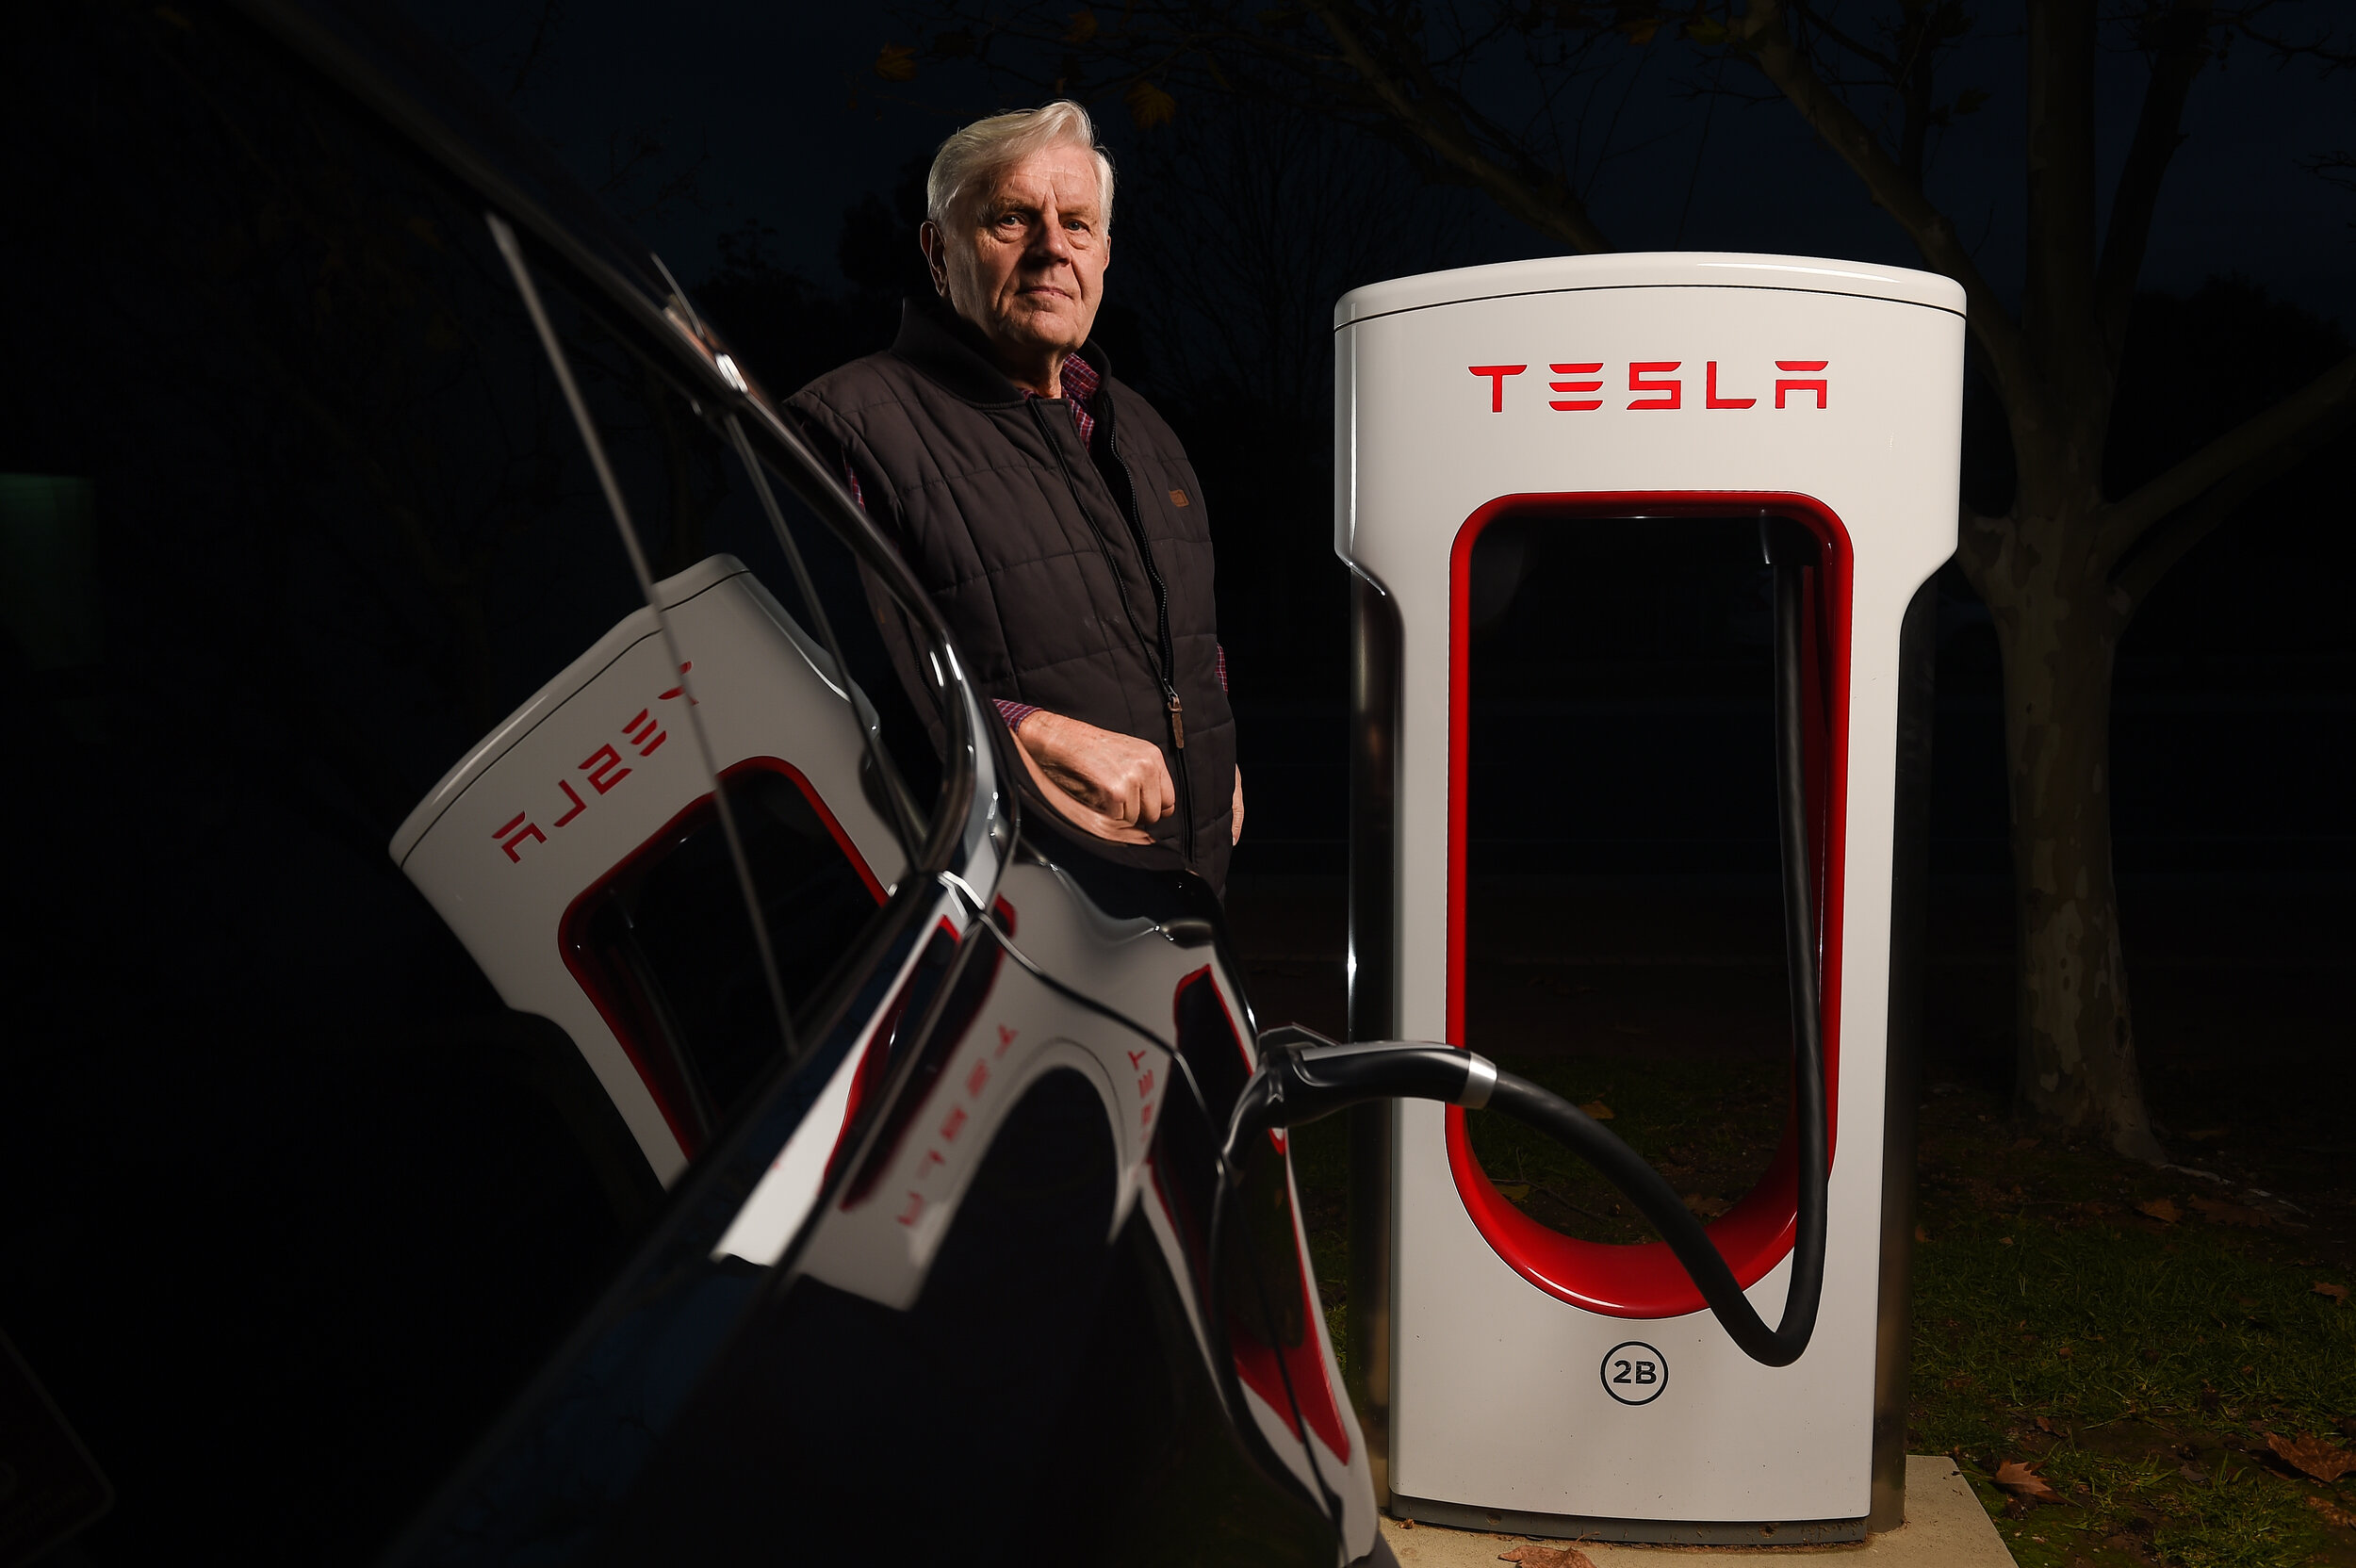  (Photo Mark Jesser) Wodonga.
Albury's Klaus Wolki with his Model X Tesla. Weekender on electric cars in the country. Charging at Wodonga Supercharger. 